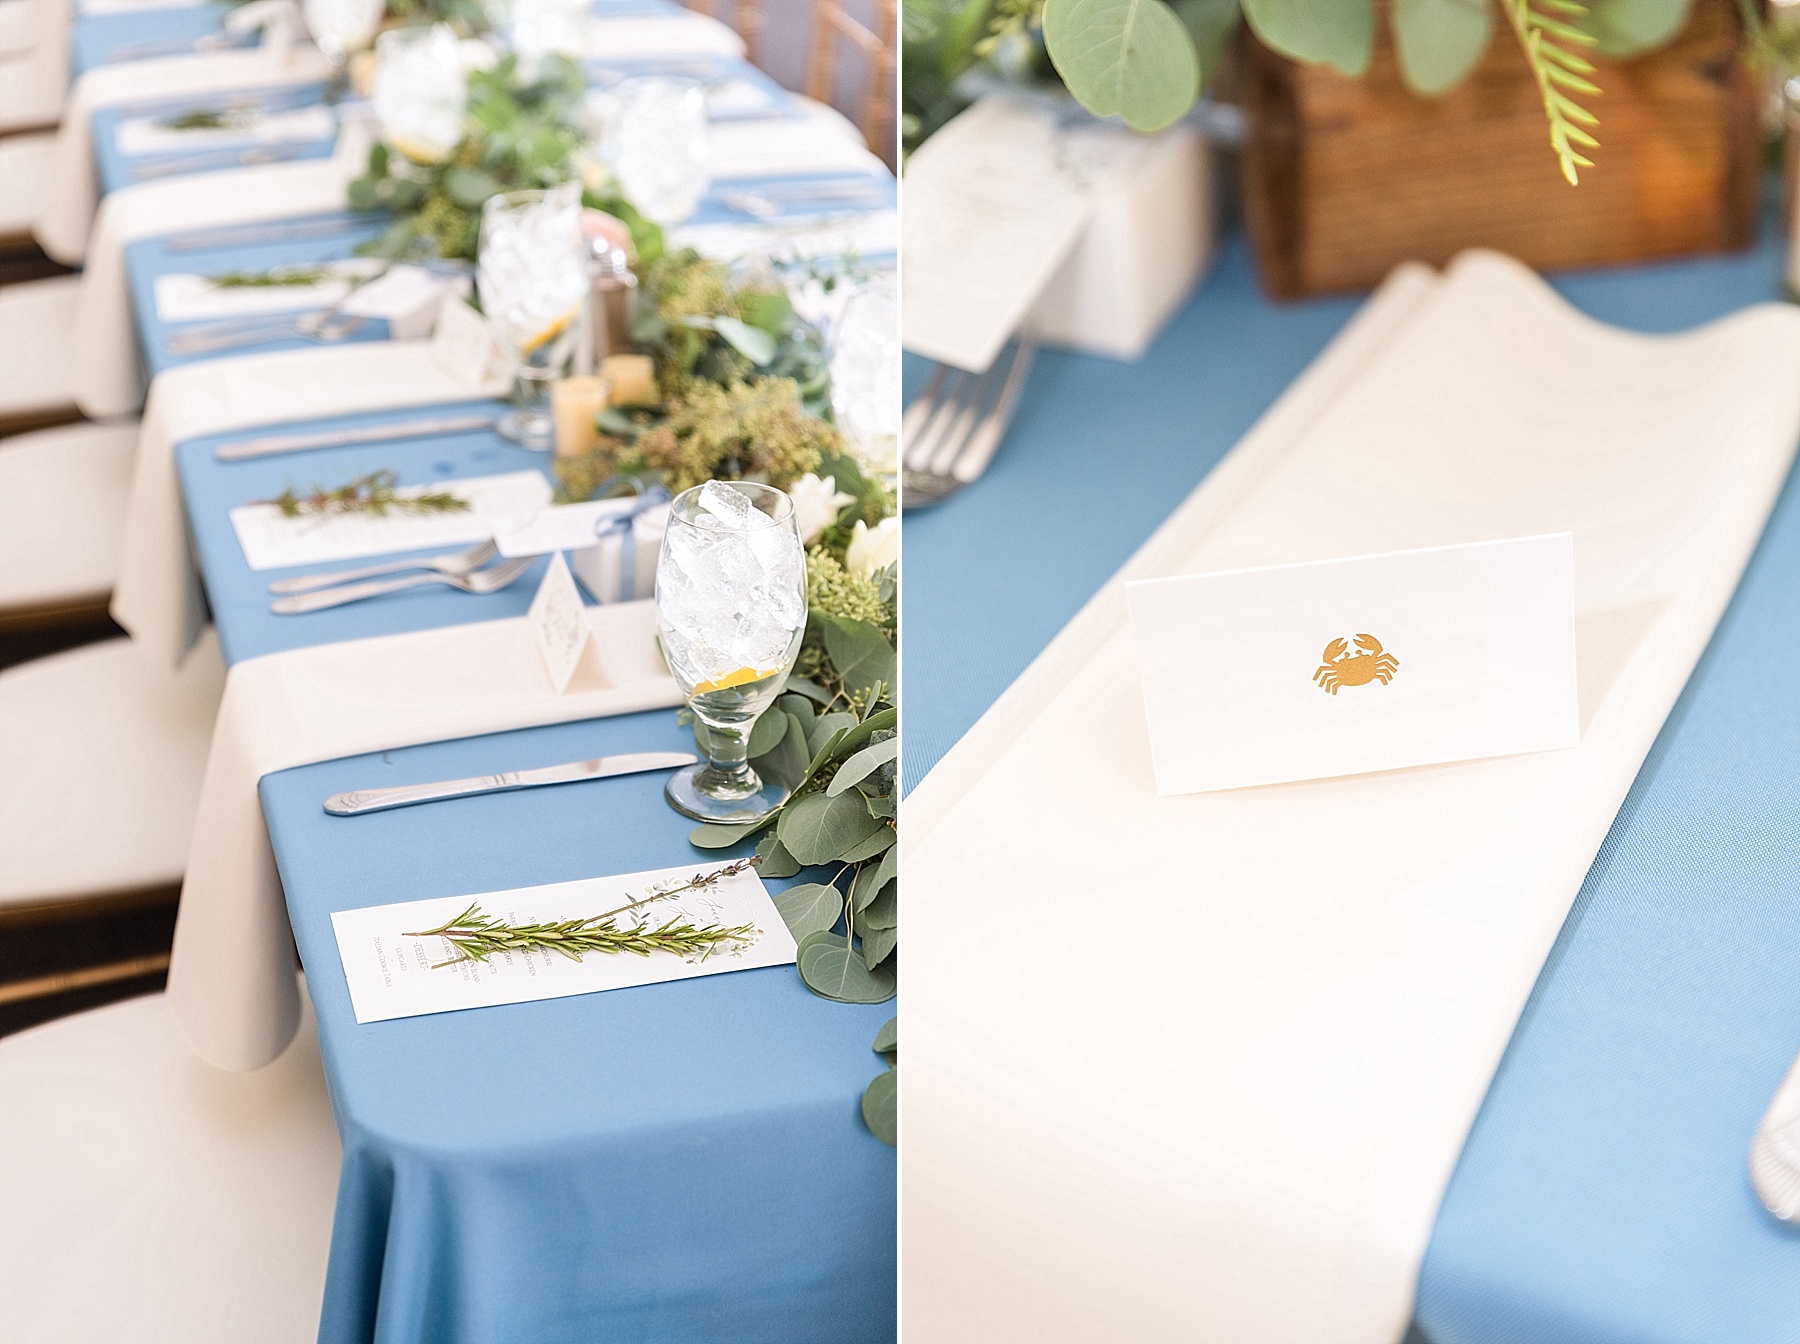 Maryland inspired place settings for romantic wedding photographed by Alexandra Mandato Photography